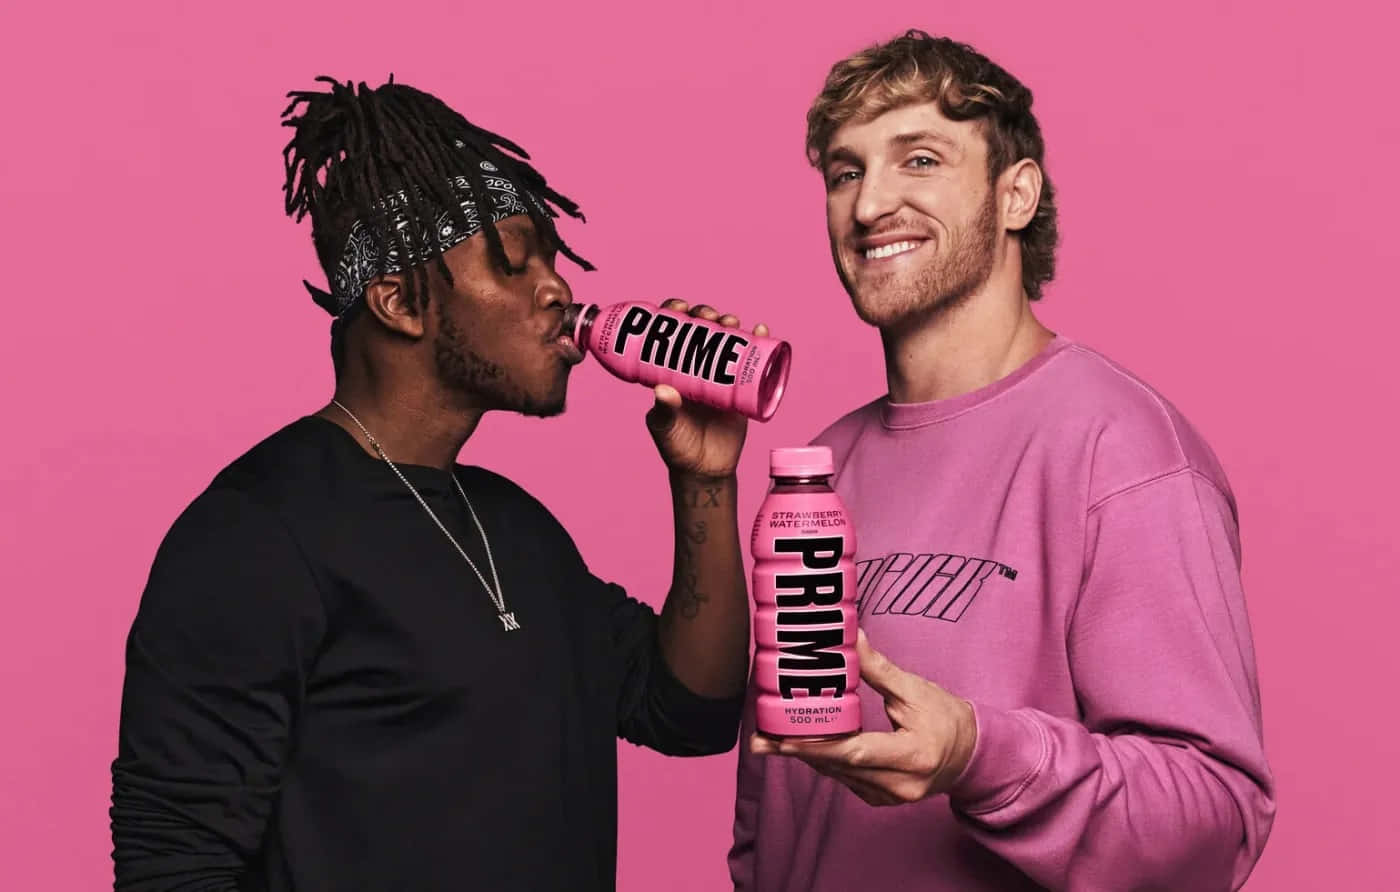 Prime Drink Promotionwith Influencers Wallpaper